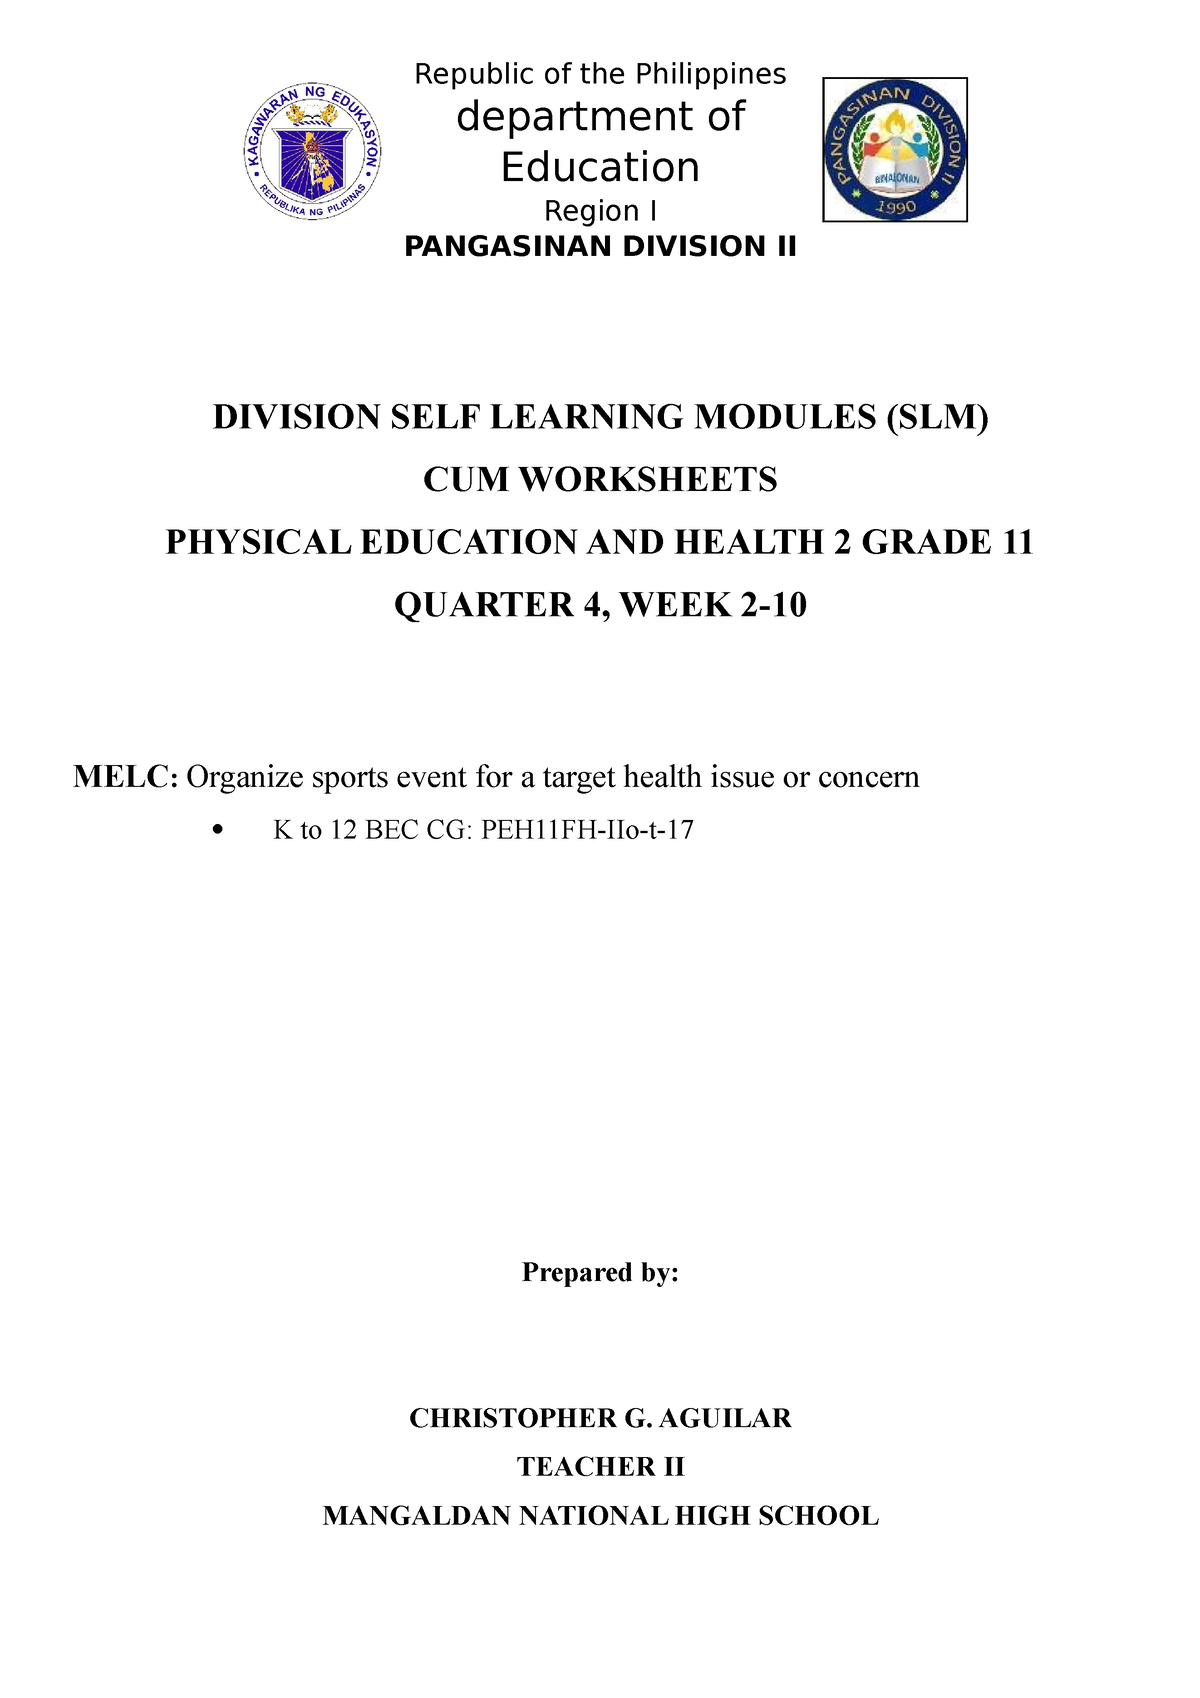 Division Self Learning Modules Peh 2 Melc 7 Division Self Learning Modules Slm Cum 3891